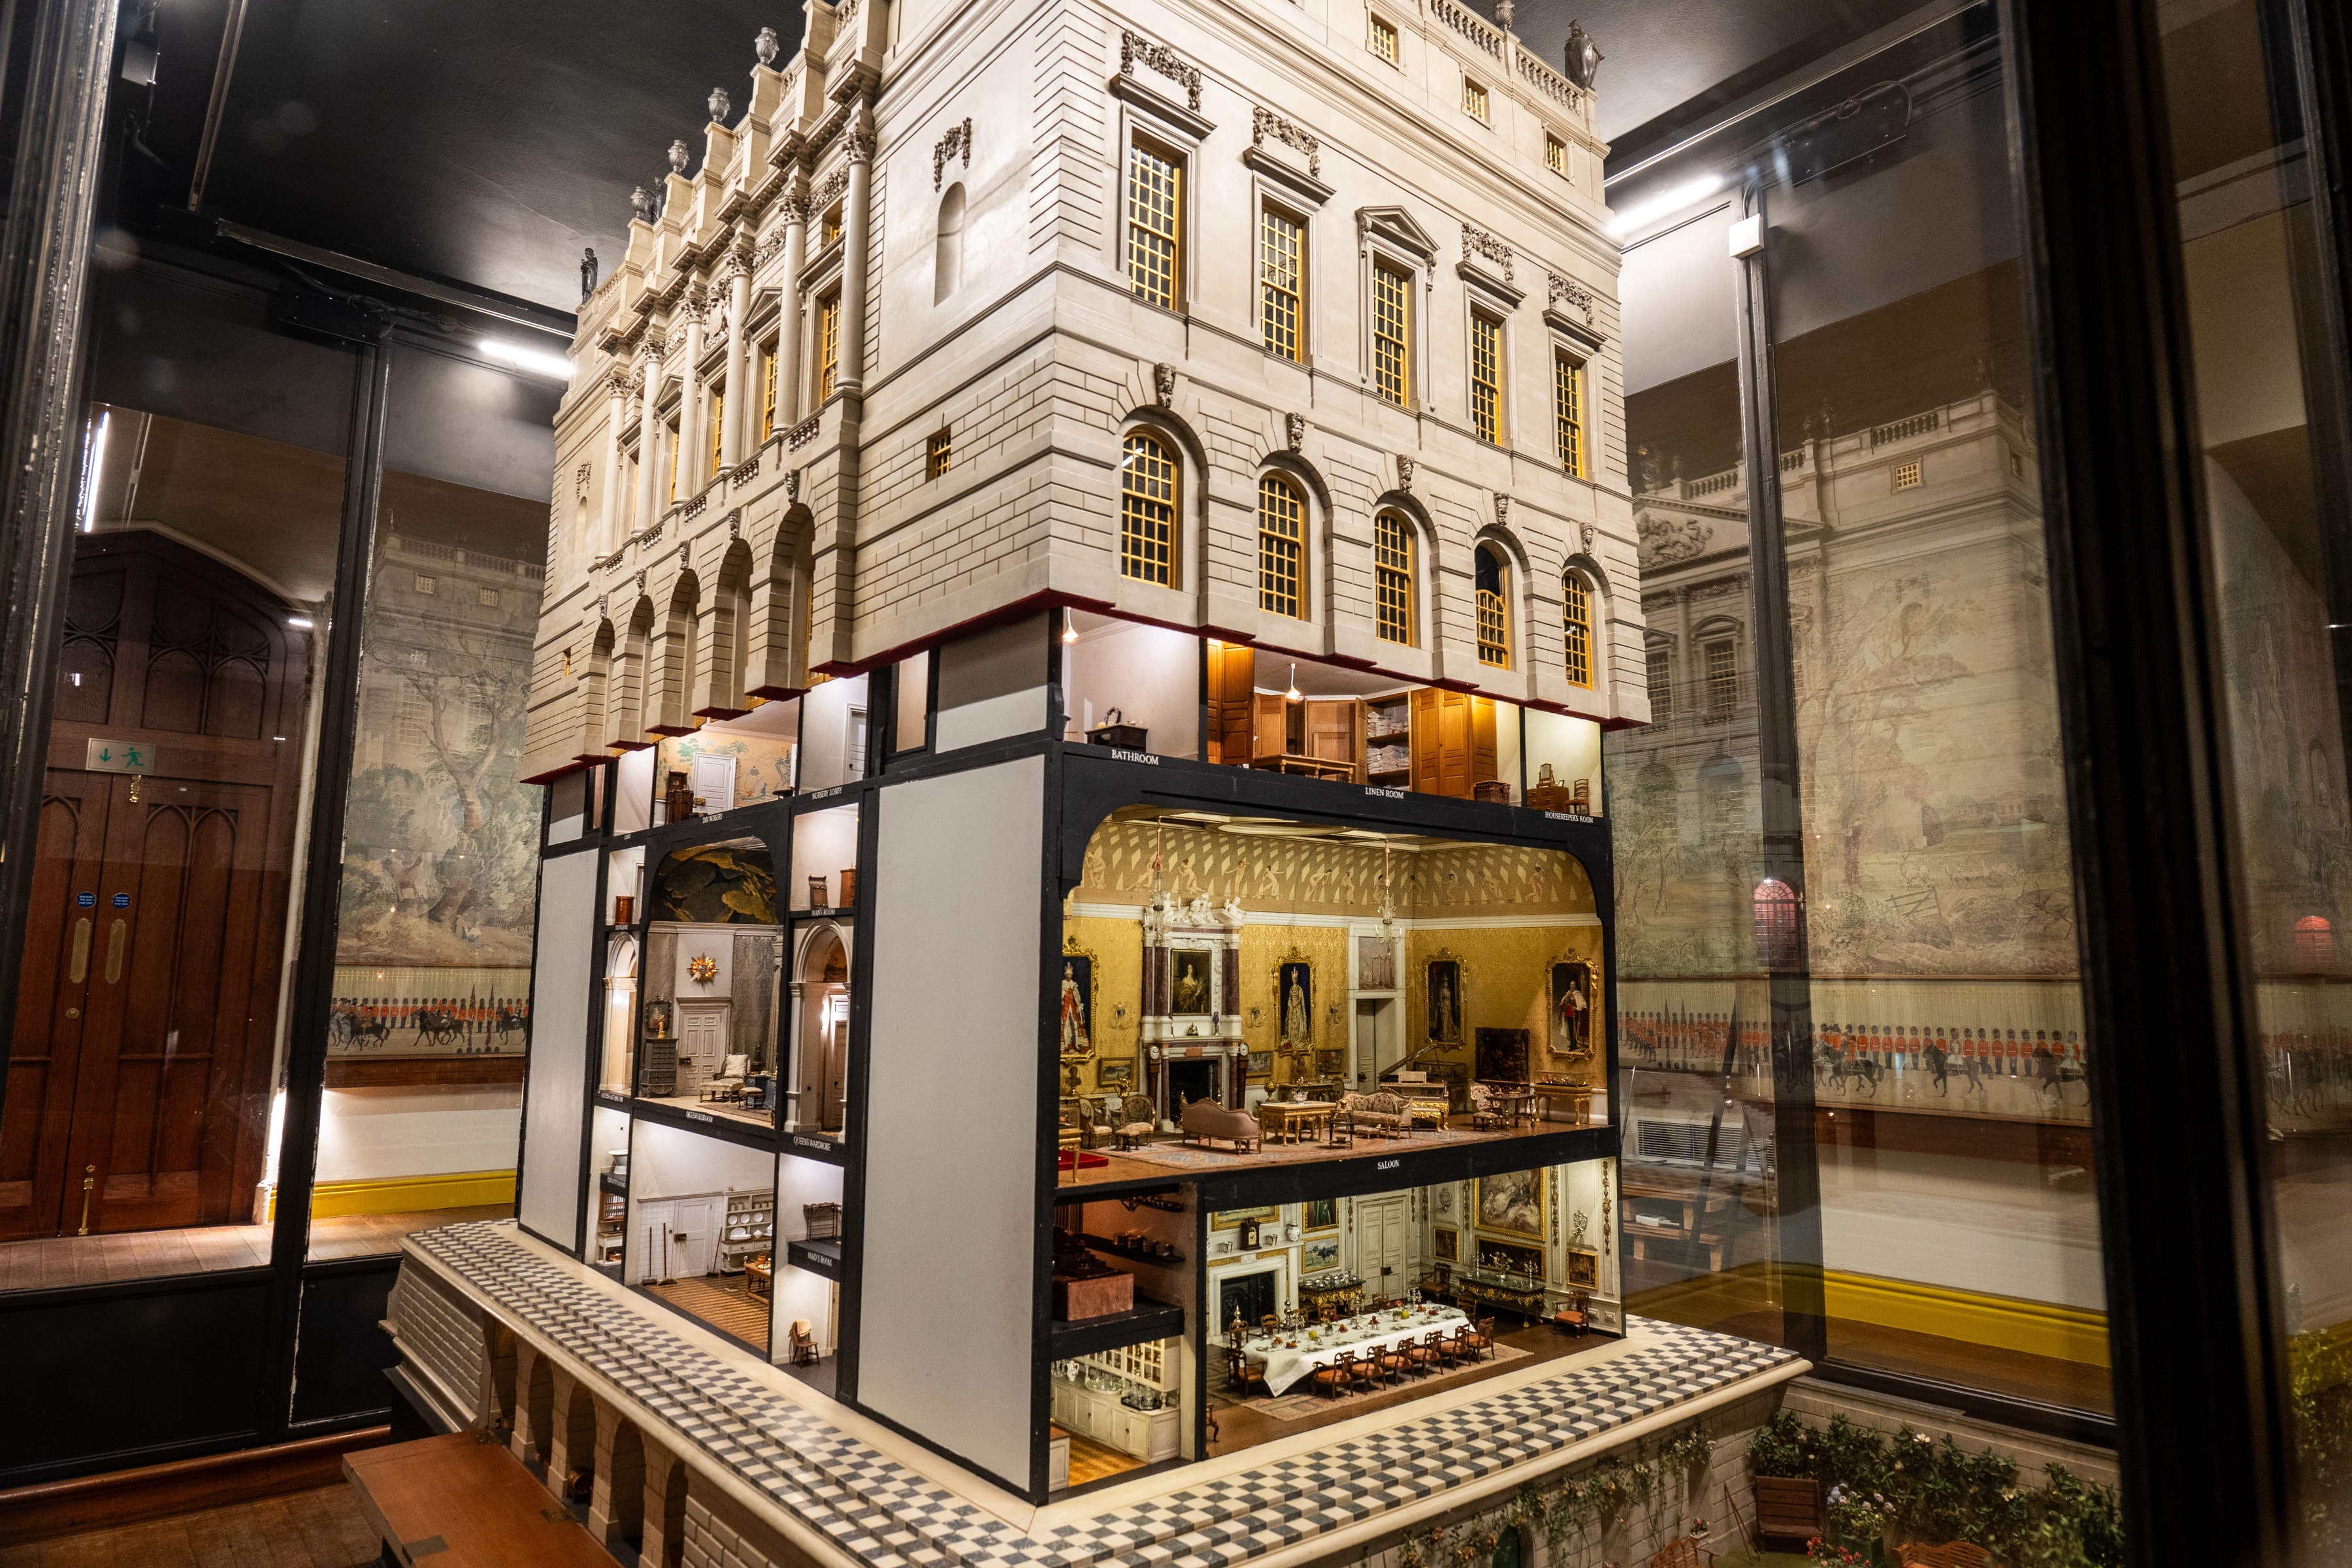 Queen Mary's Dolls' House on show at Windsor Castle